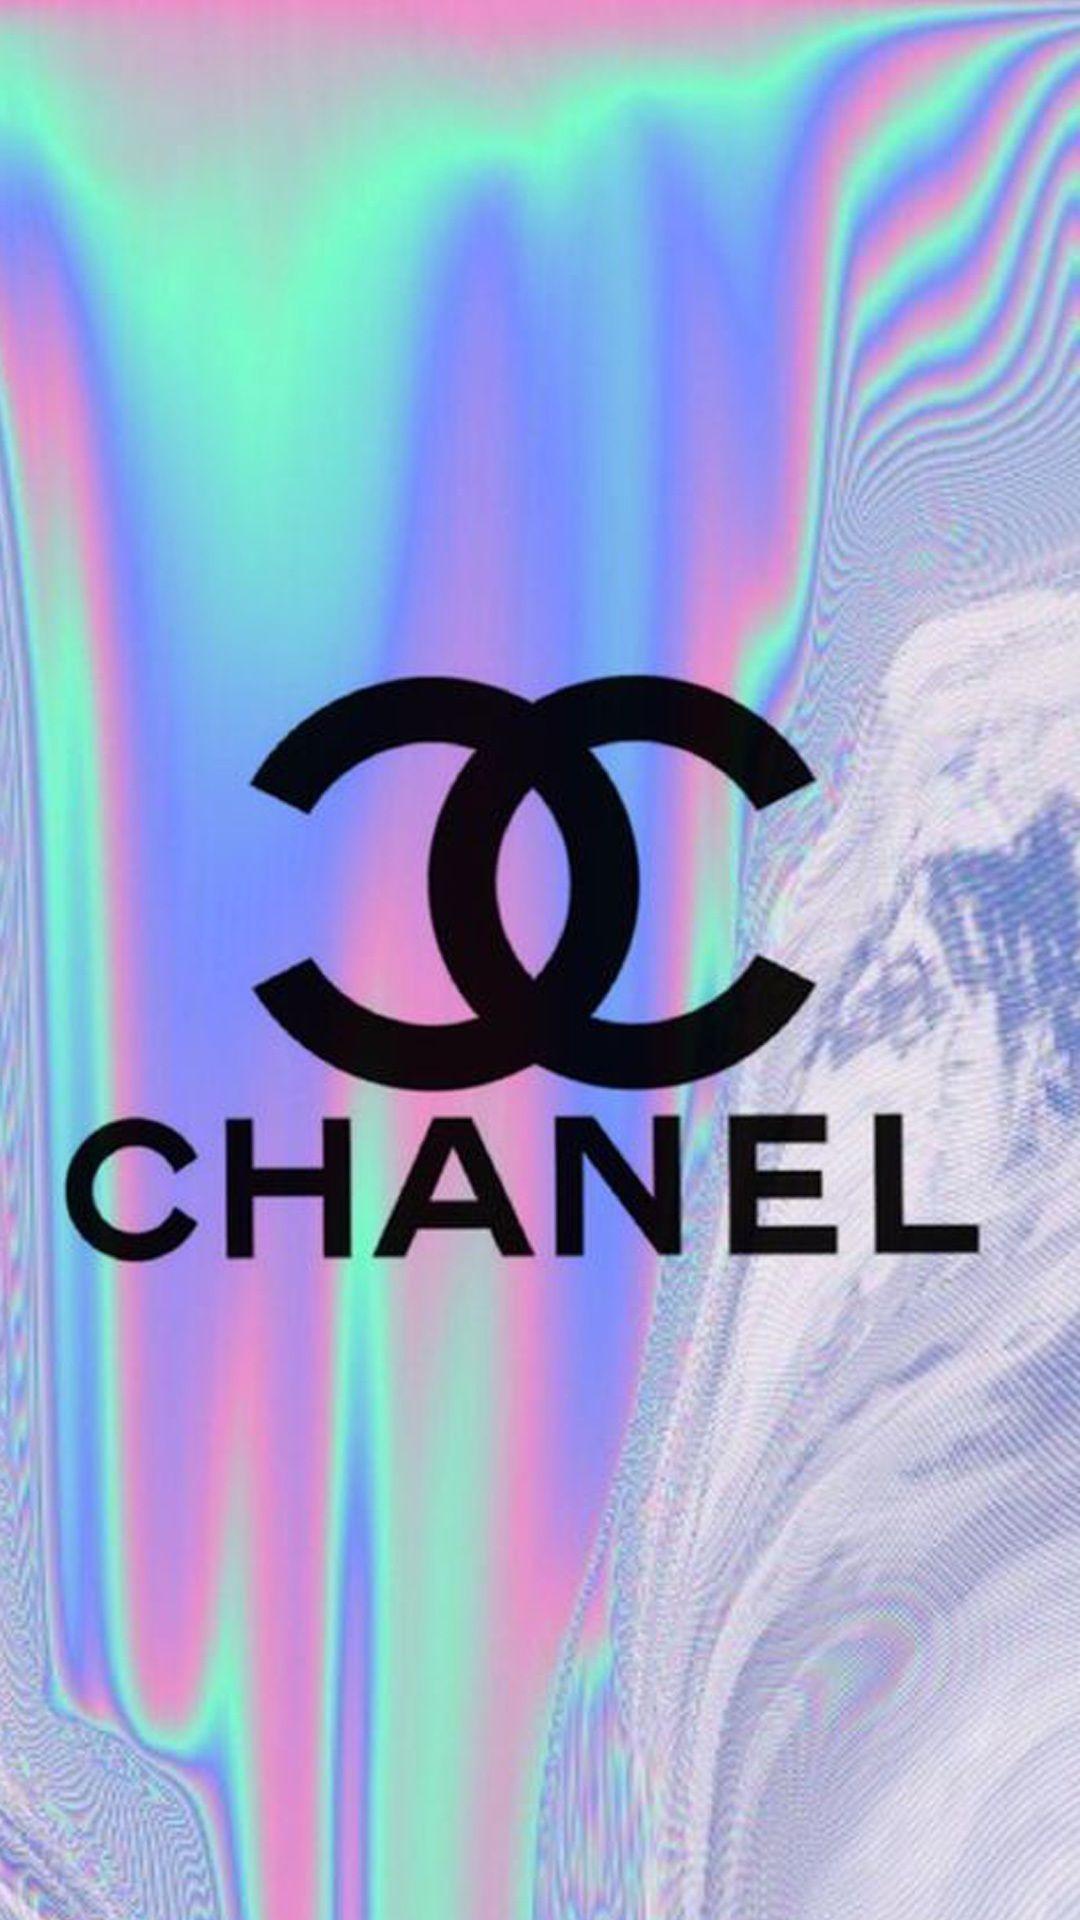 CHANEL in 2019